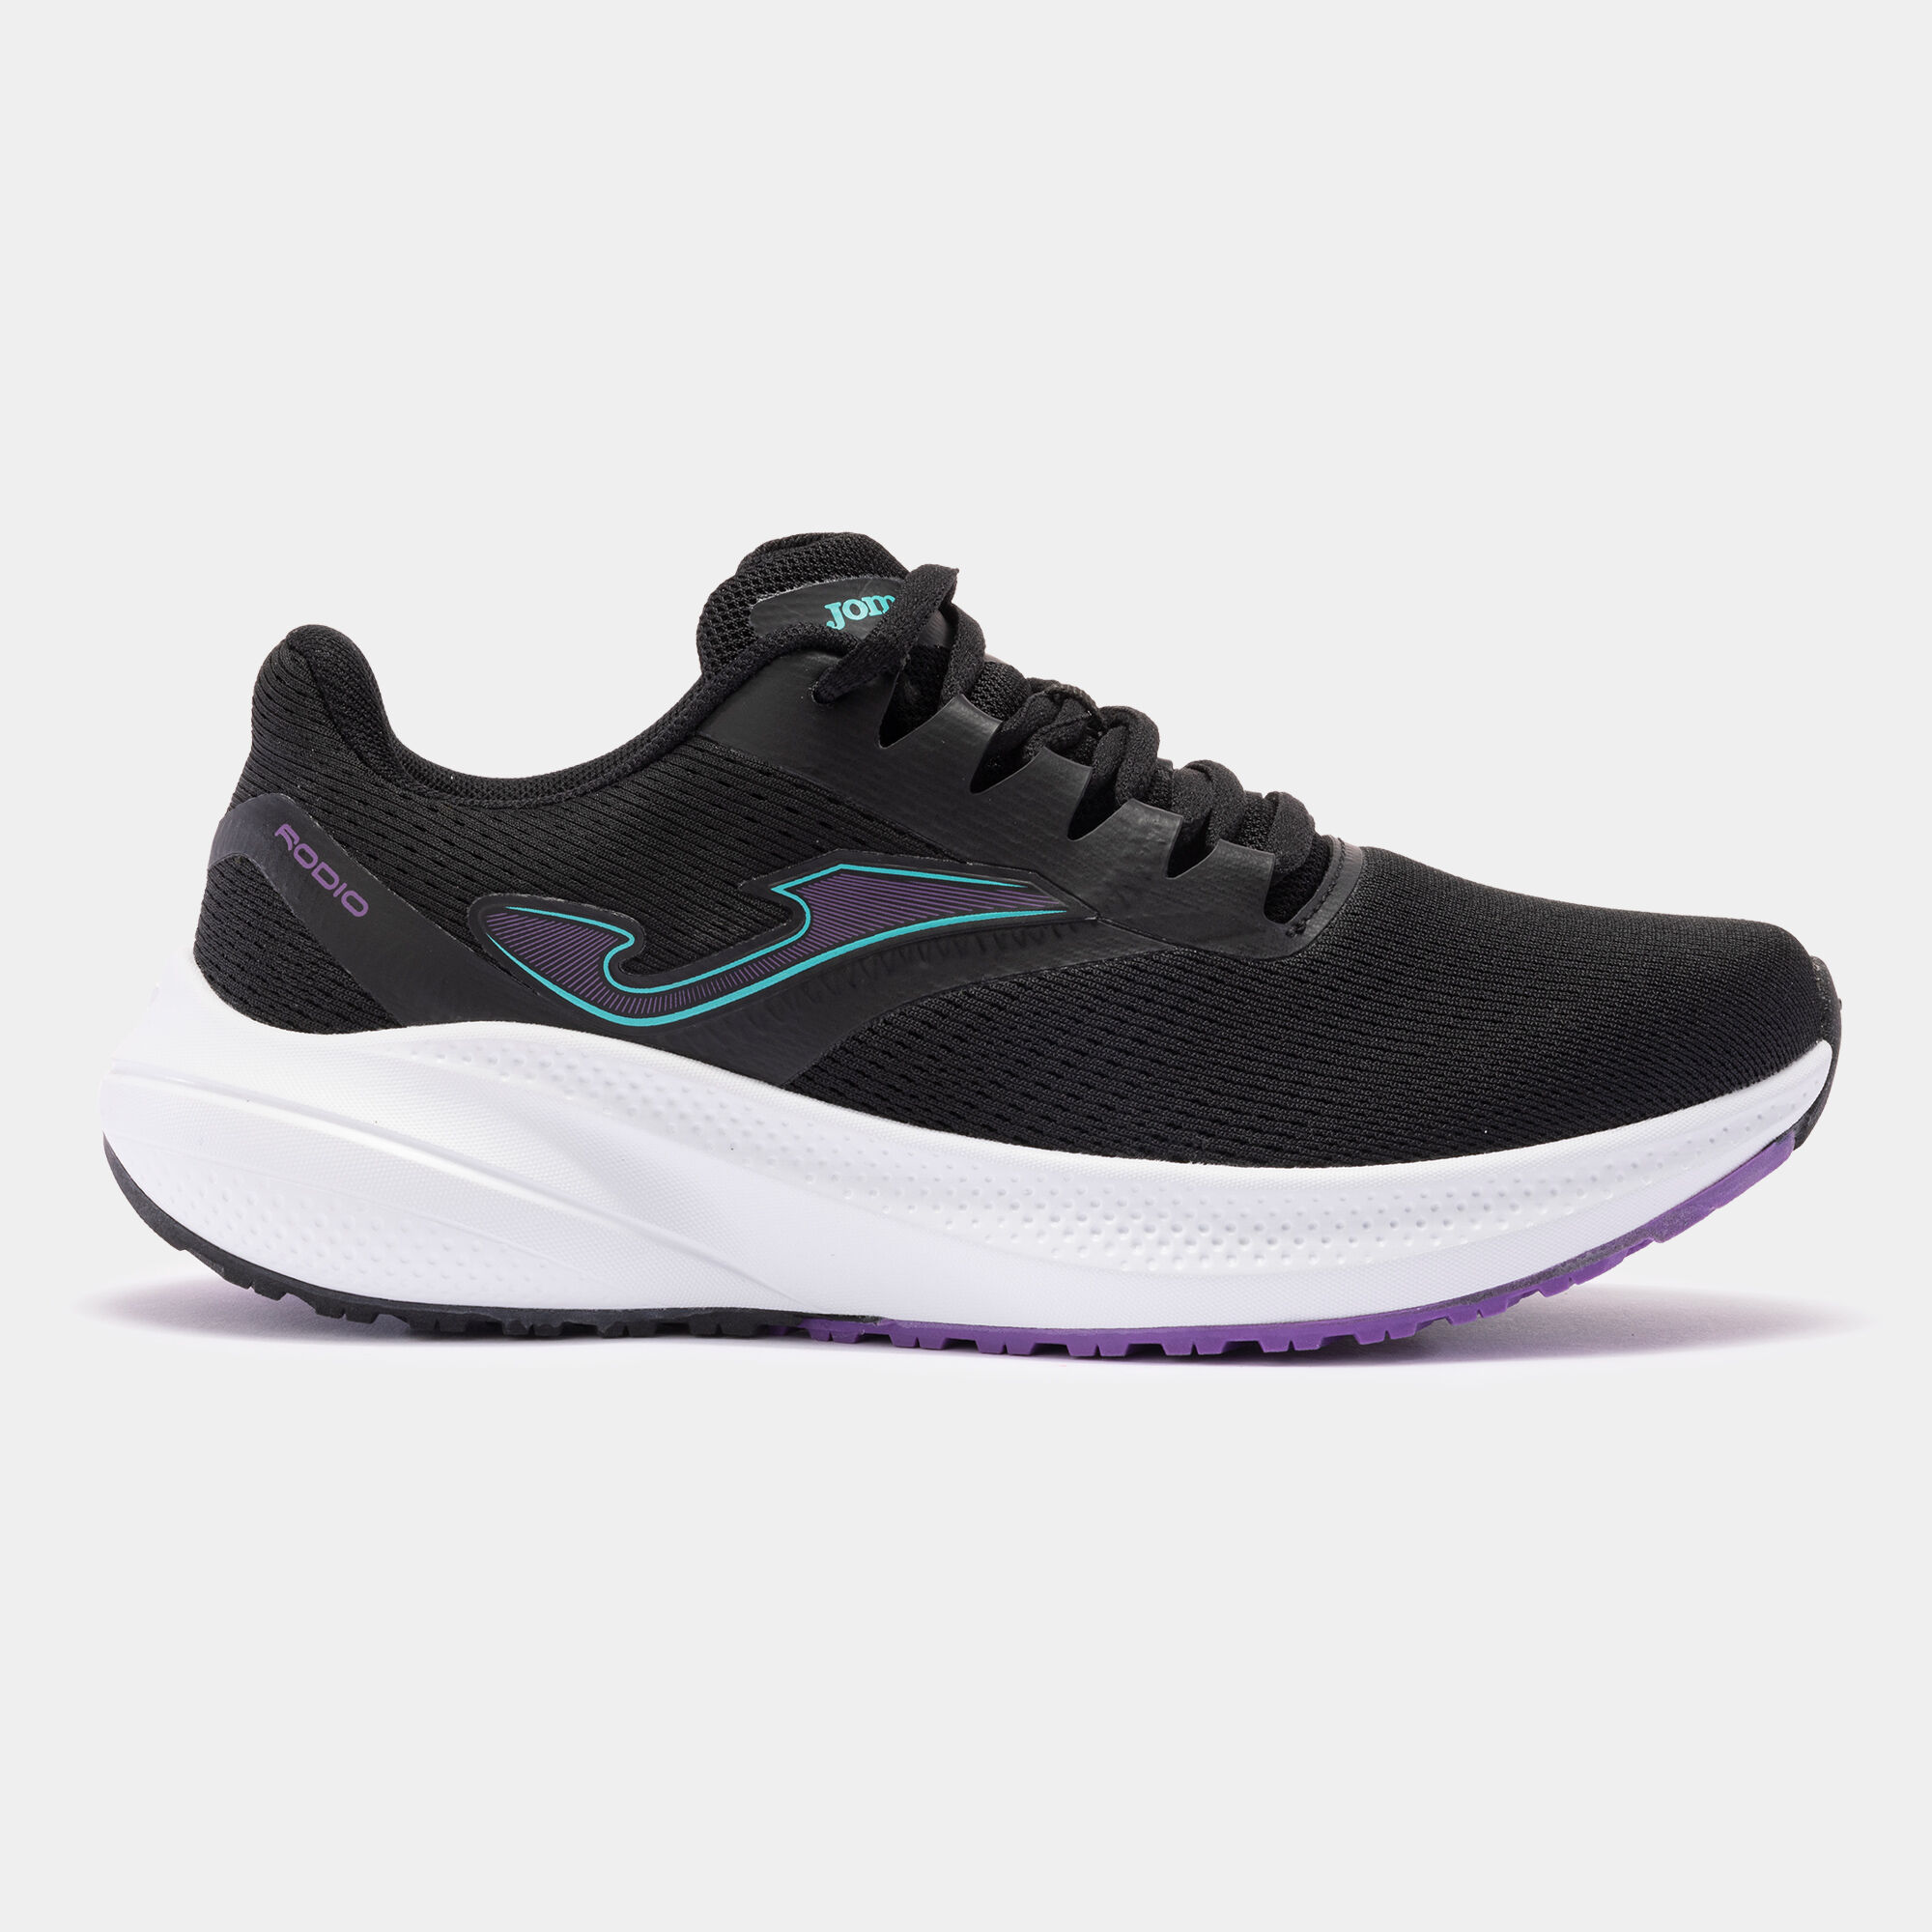 Running shoes Rodio Lady 24 woman black